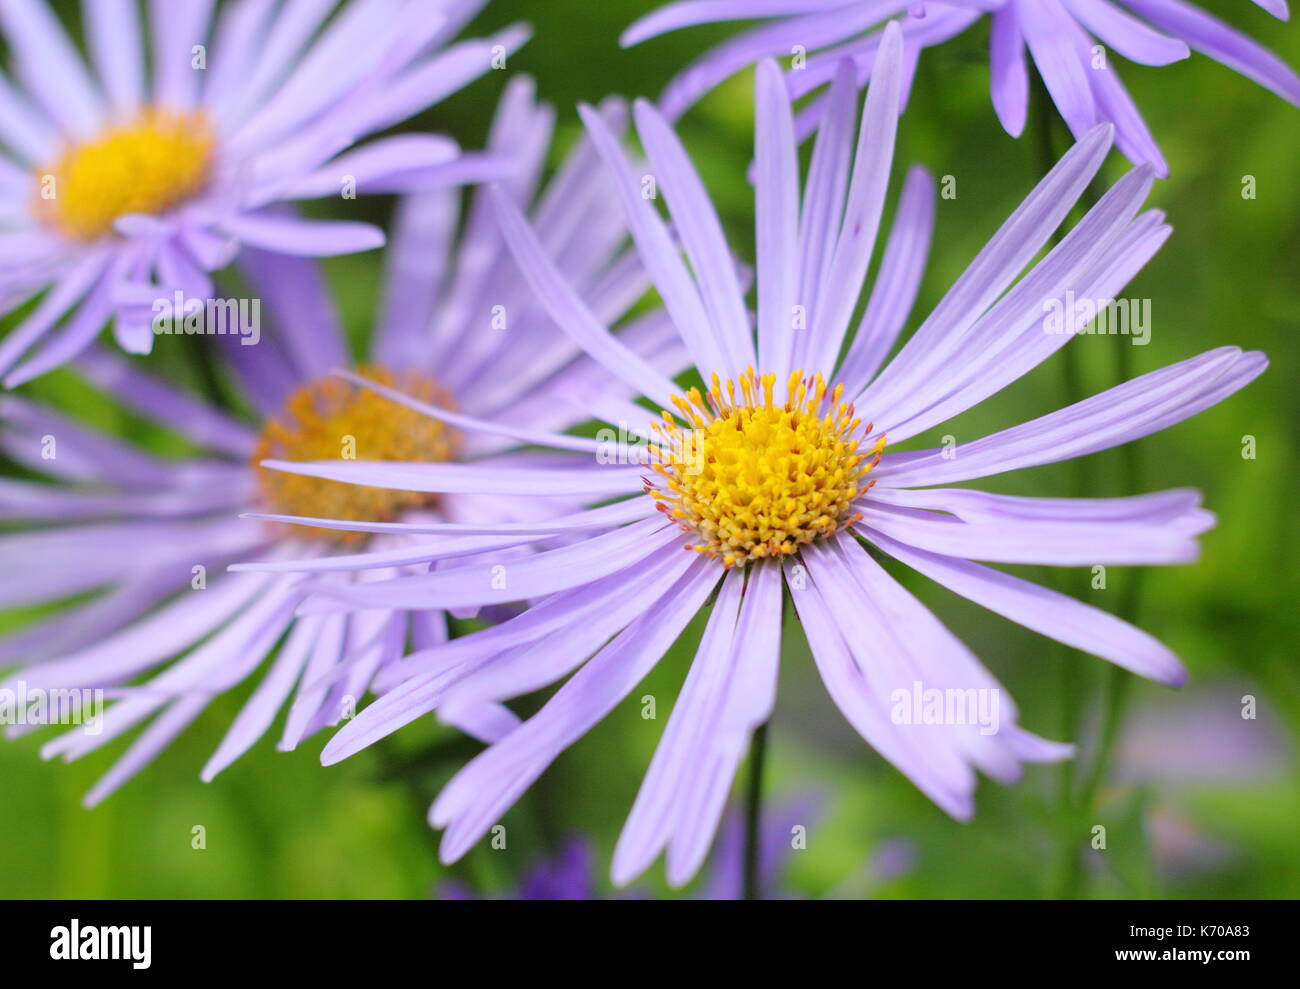 Aster Frikartii 'Monch' a lavender-blue herbaceous perennial, in full bloom in an English garden border in summer Stock Photo